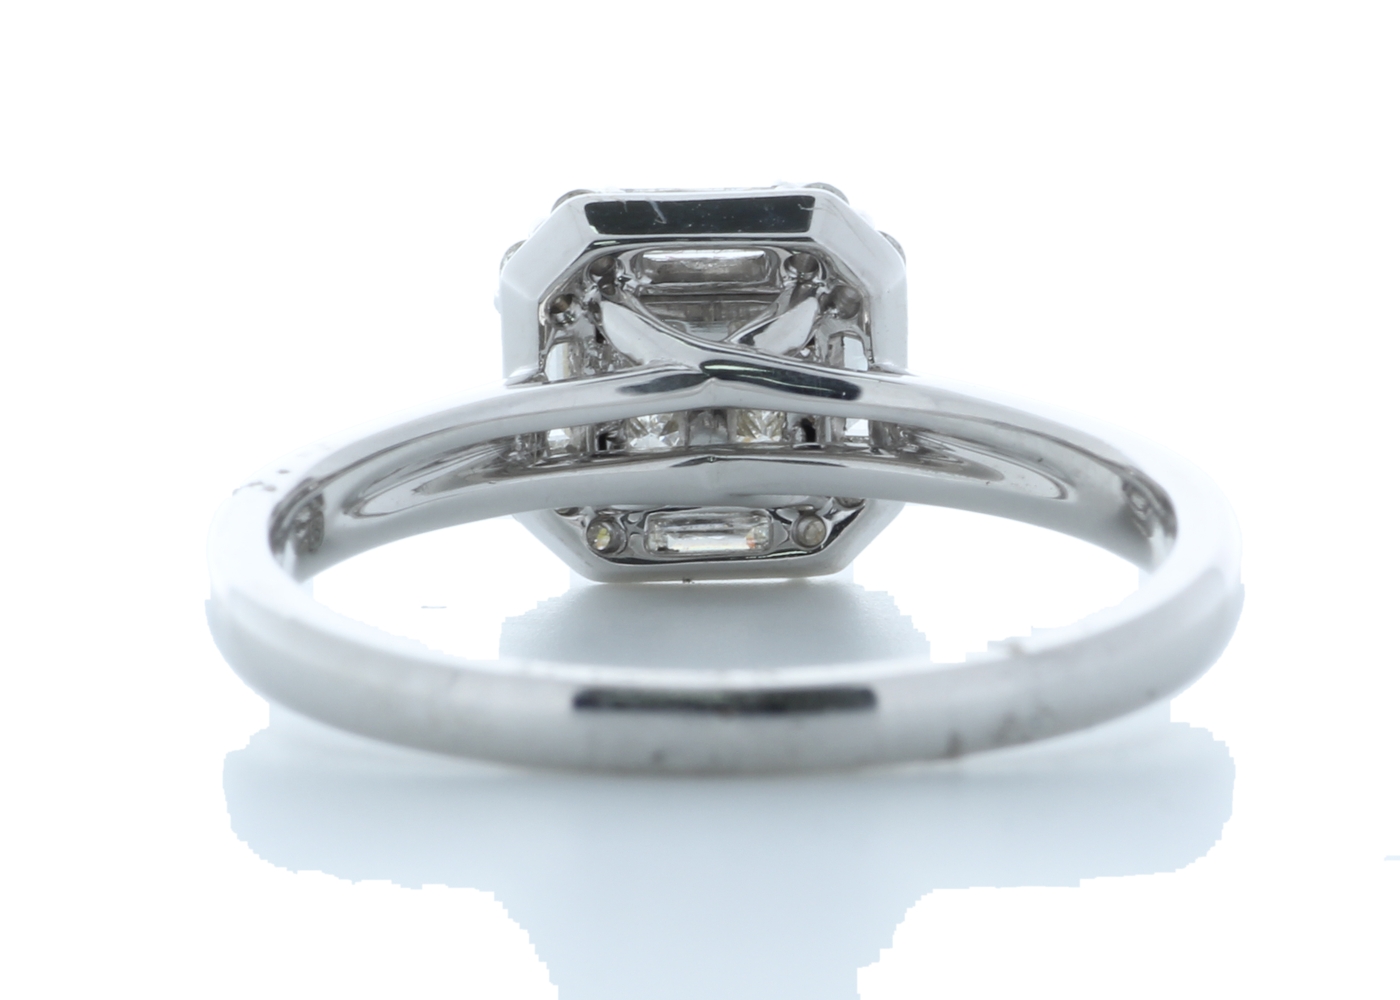 18ct White Gold Single Stone With Halo Setting Ring 0.55 Carats - Image 5 of 5